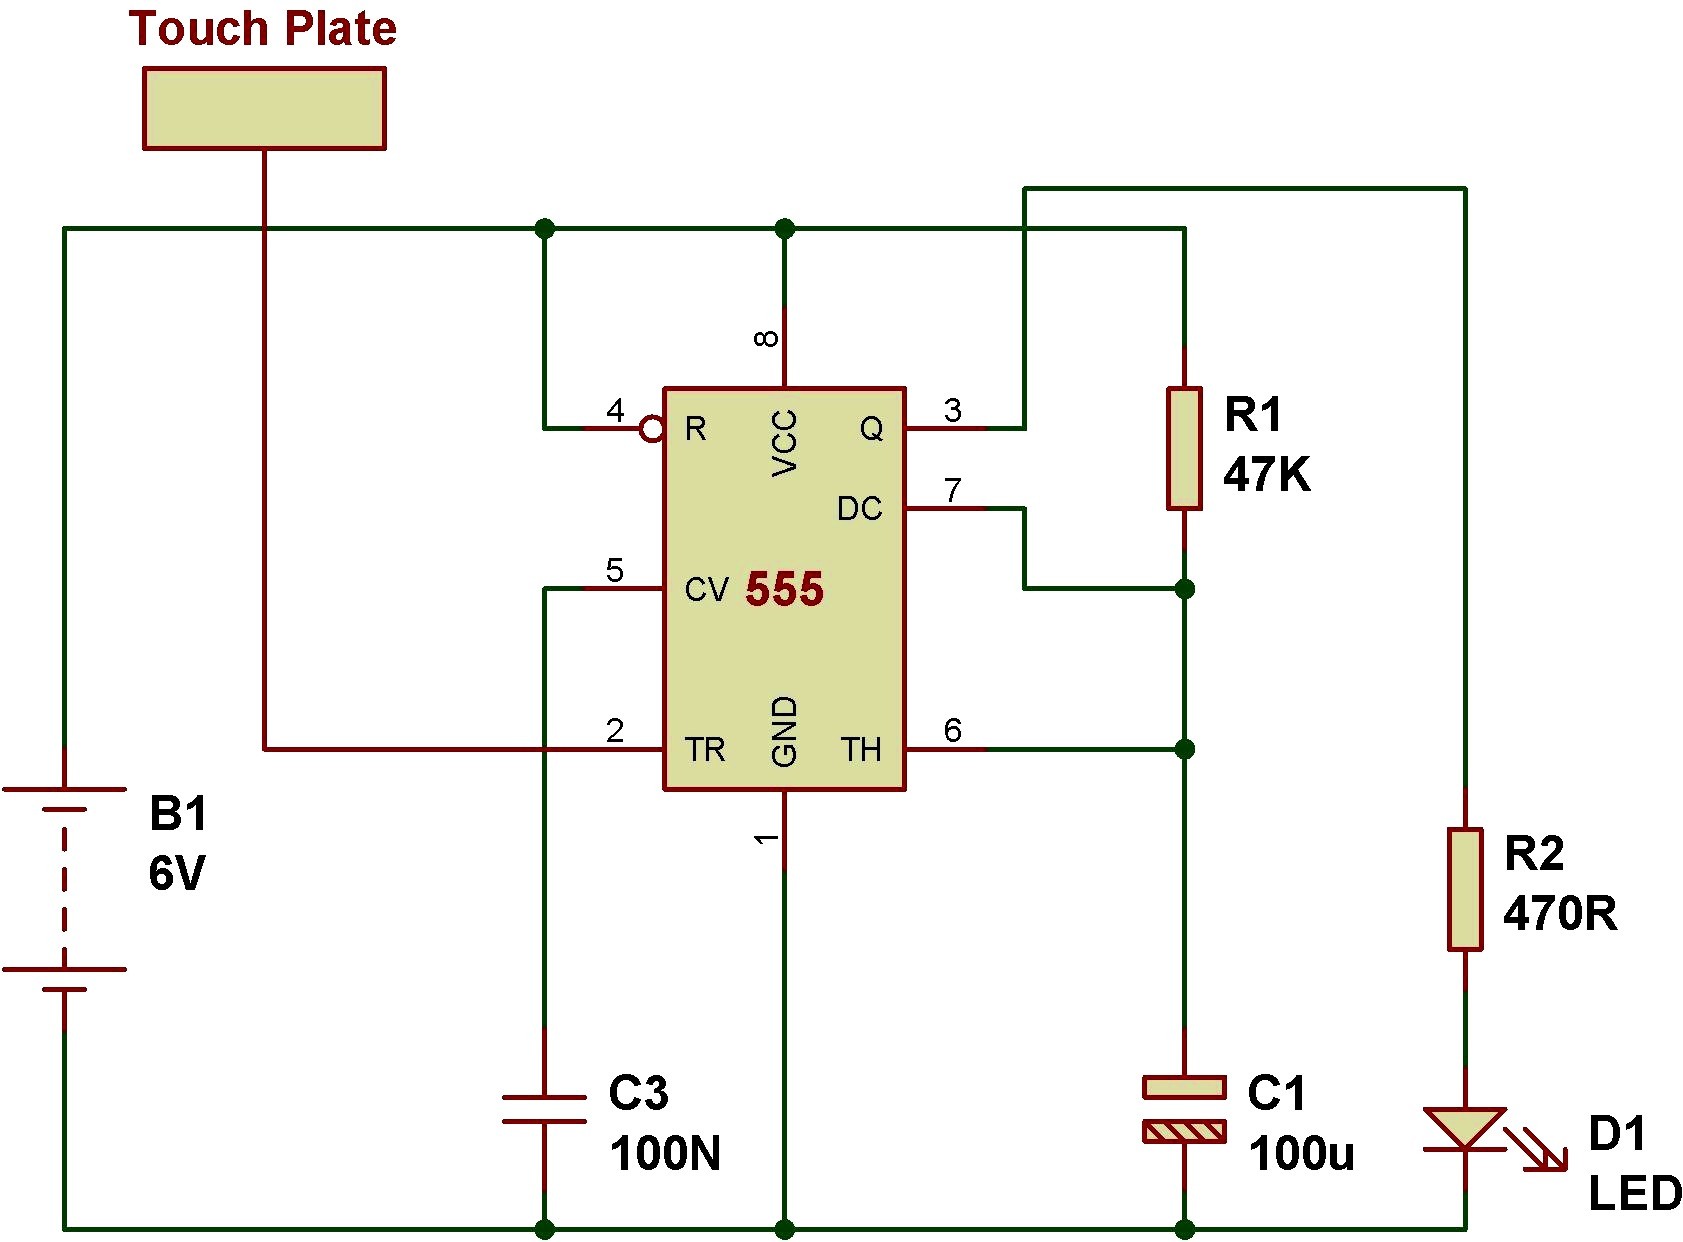 ponent Counter Circuit Using Timer Police Lights Mode Ne555 Monostable Build With Touch Se